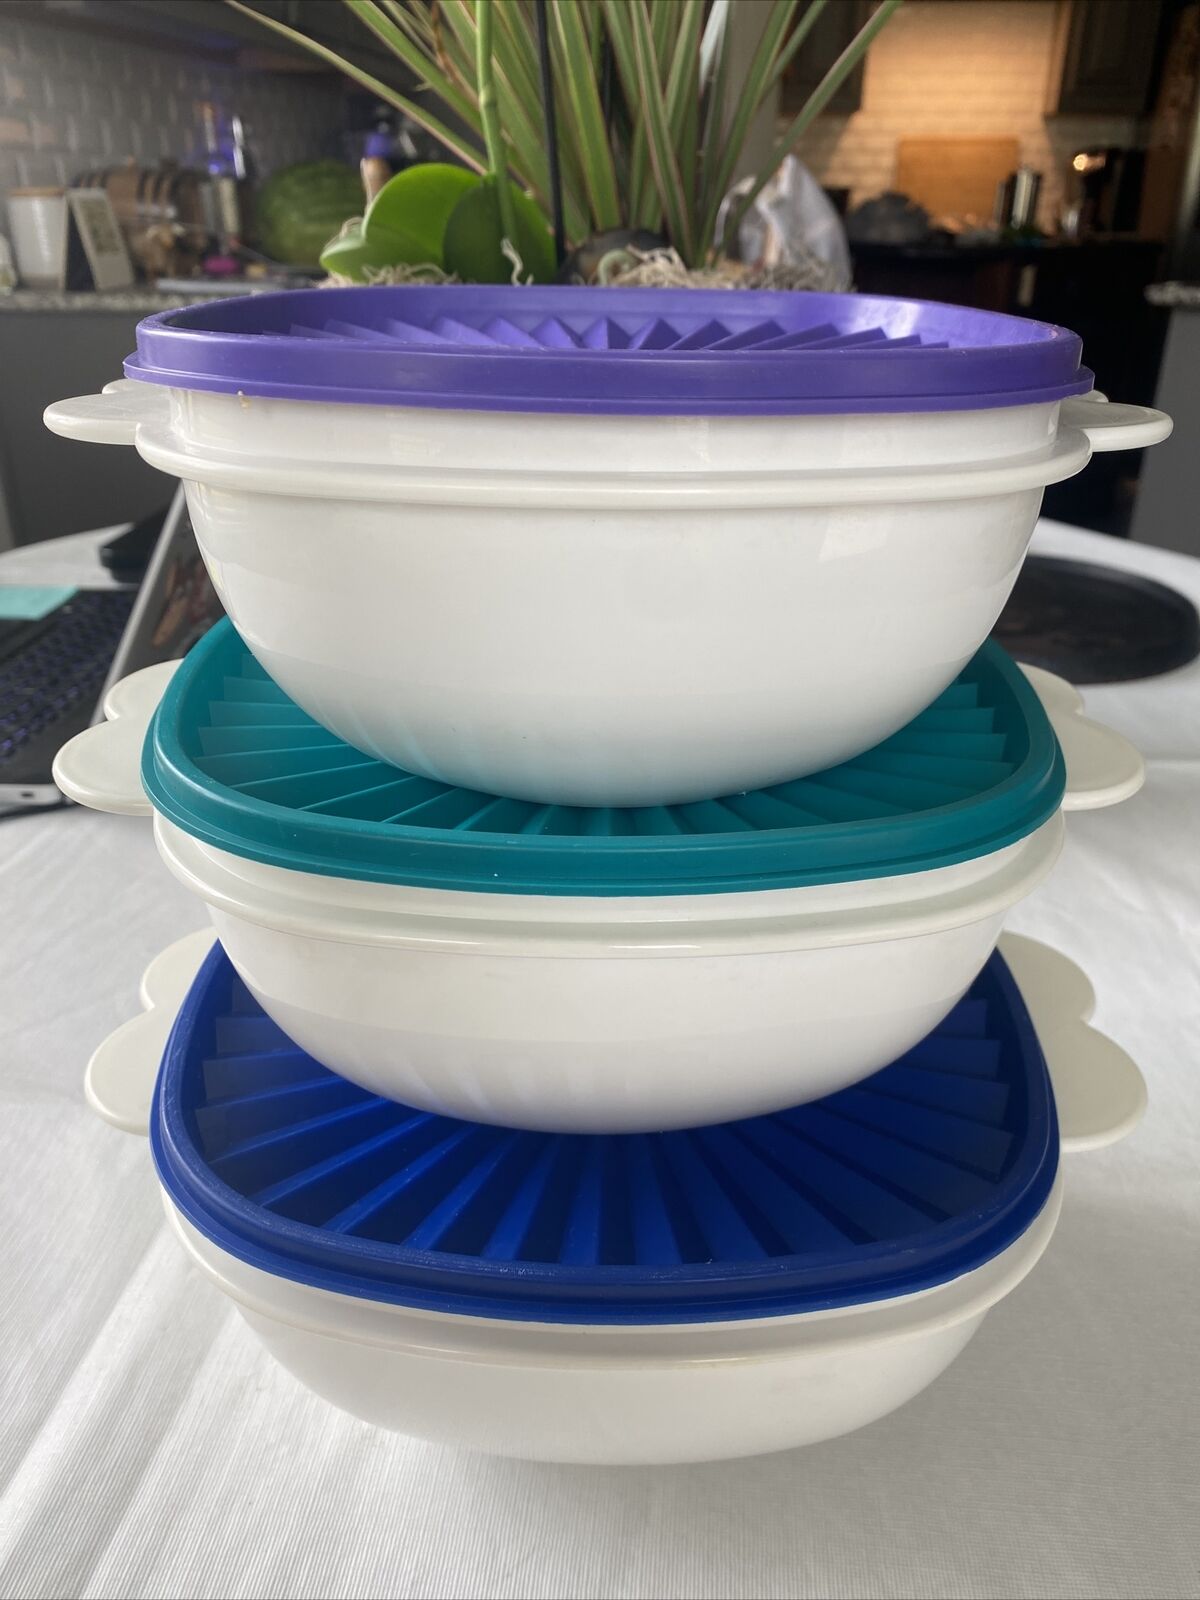 Vint. Tupperware Servalier Butterfly Tab Stacking Nesting Bowls w/ Lids Set of 3